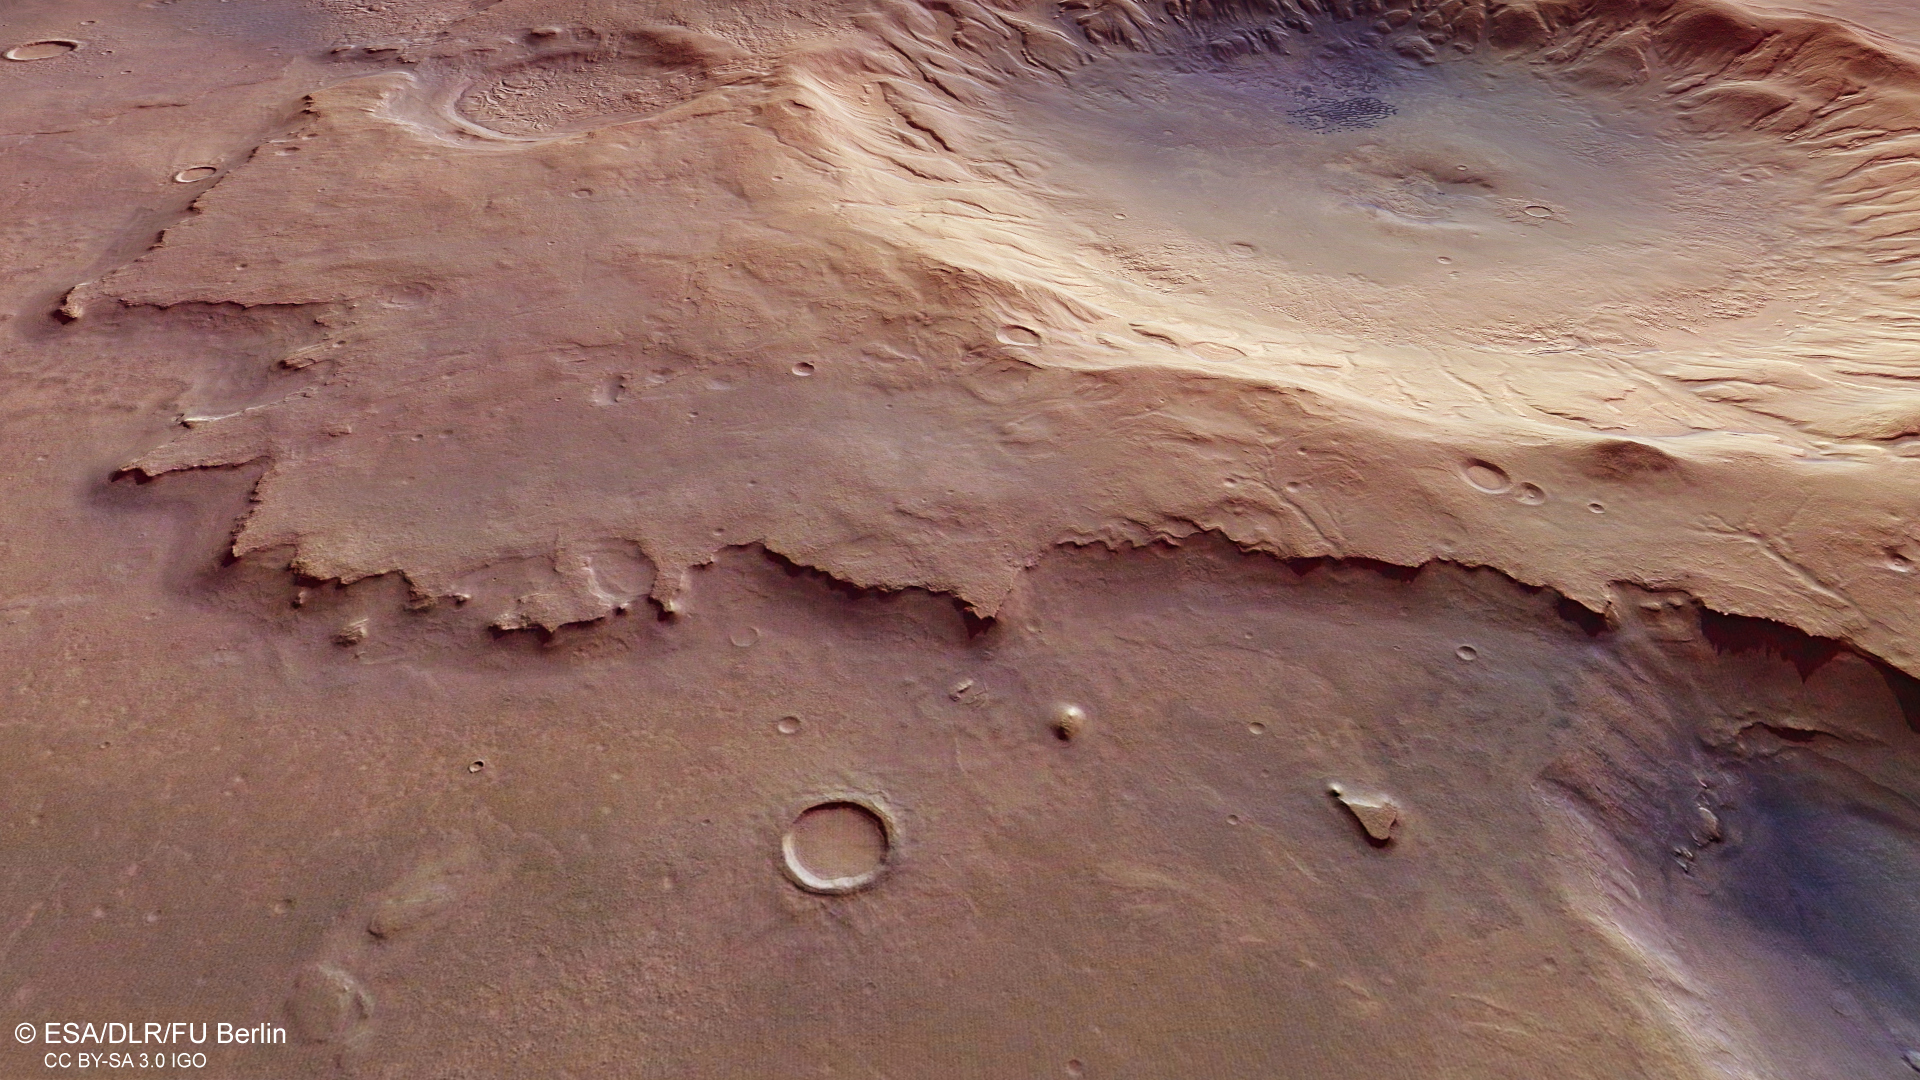 Mars_Express_spies_a_nameless_and_ancient_impact_crater